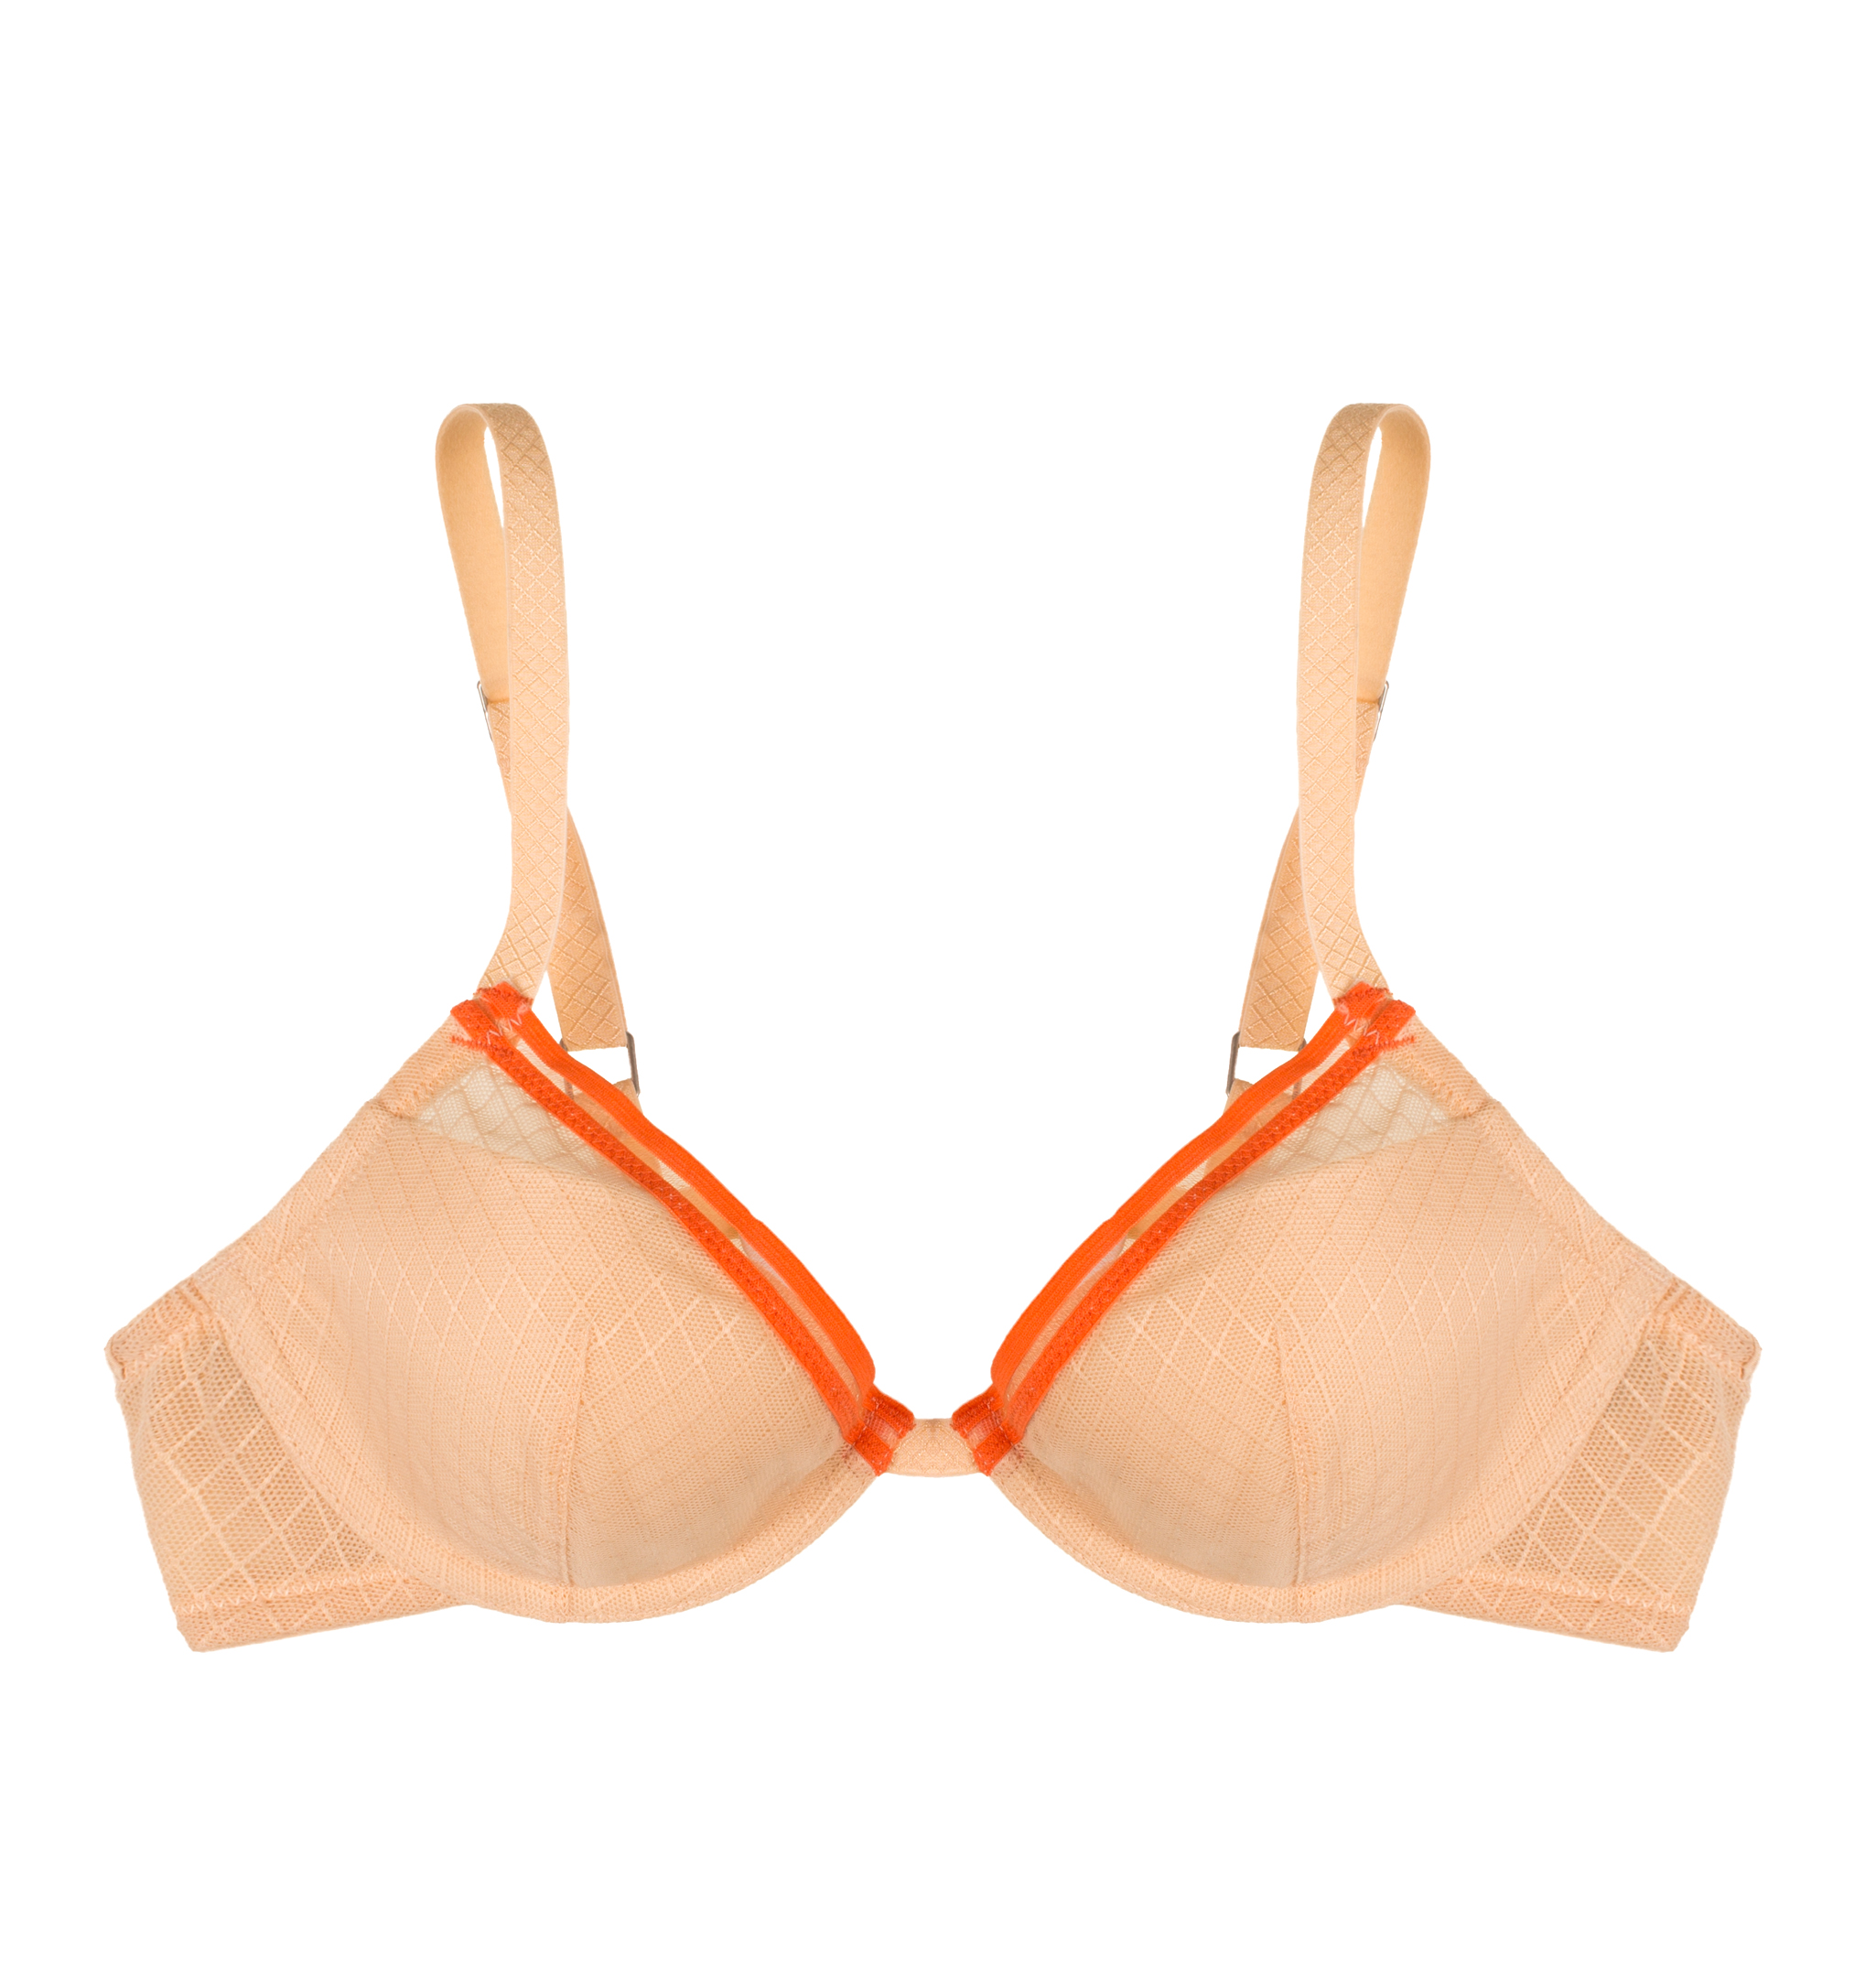 True&Co.'s Newest Bras Have a Perfect Look (and Fit!)